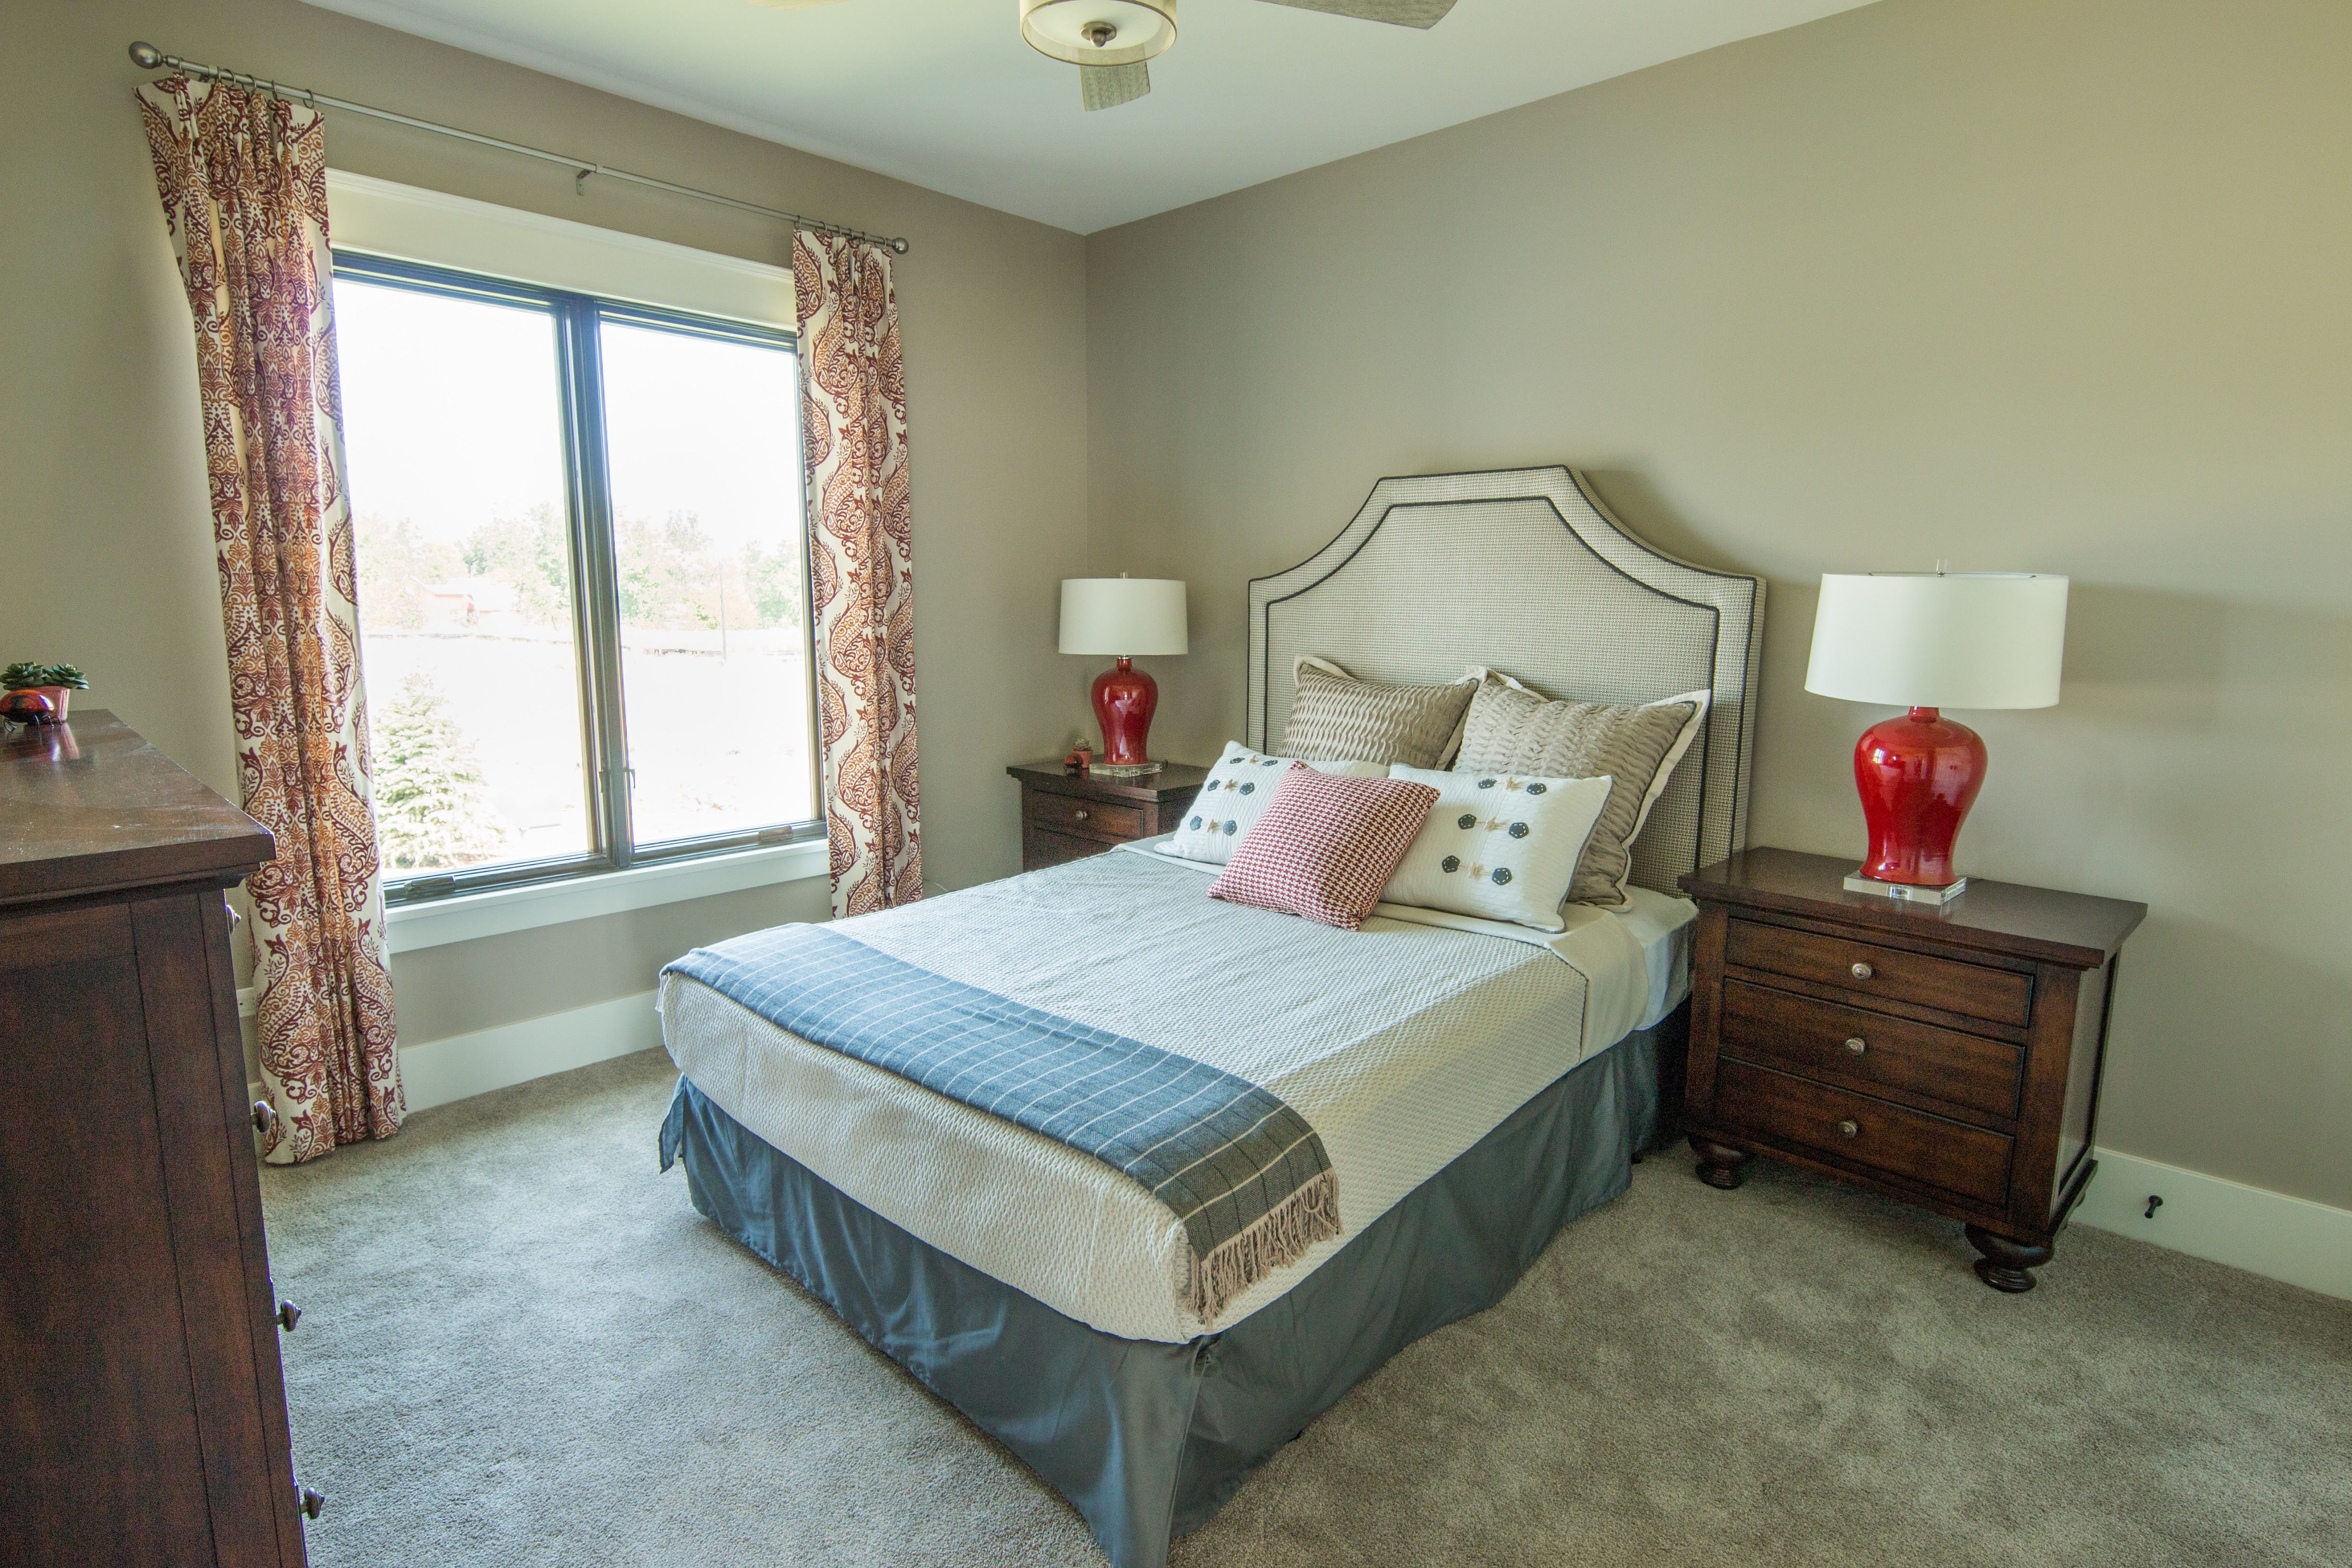 Guest room with upholstered headboard and red bedside lamps